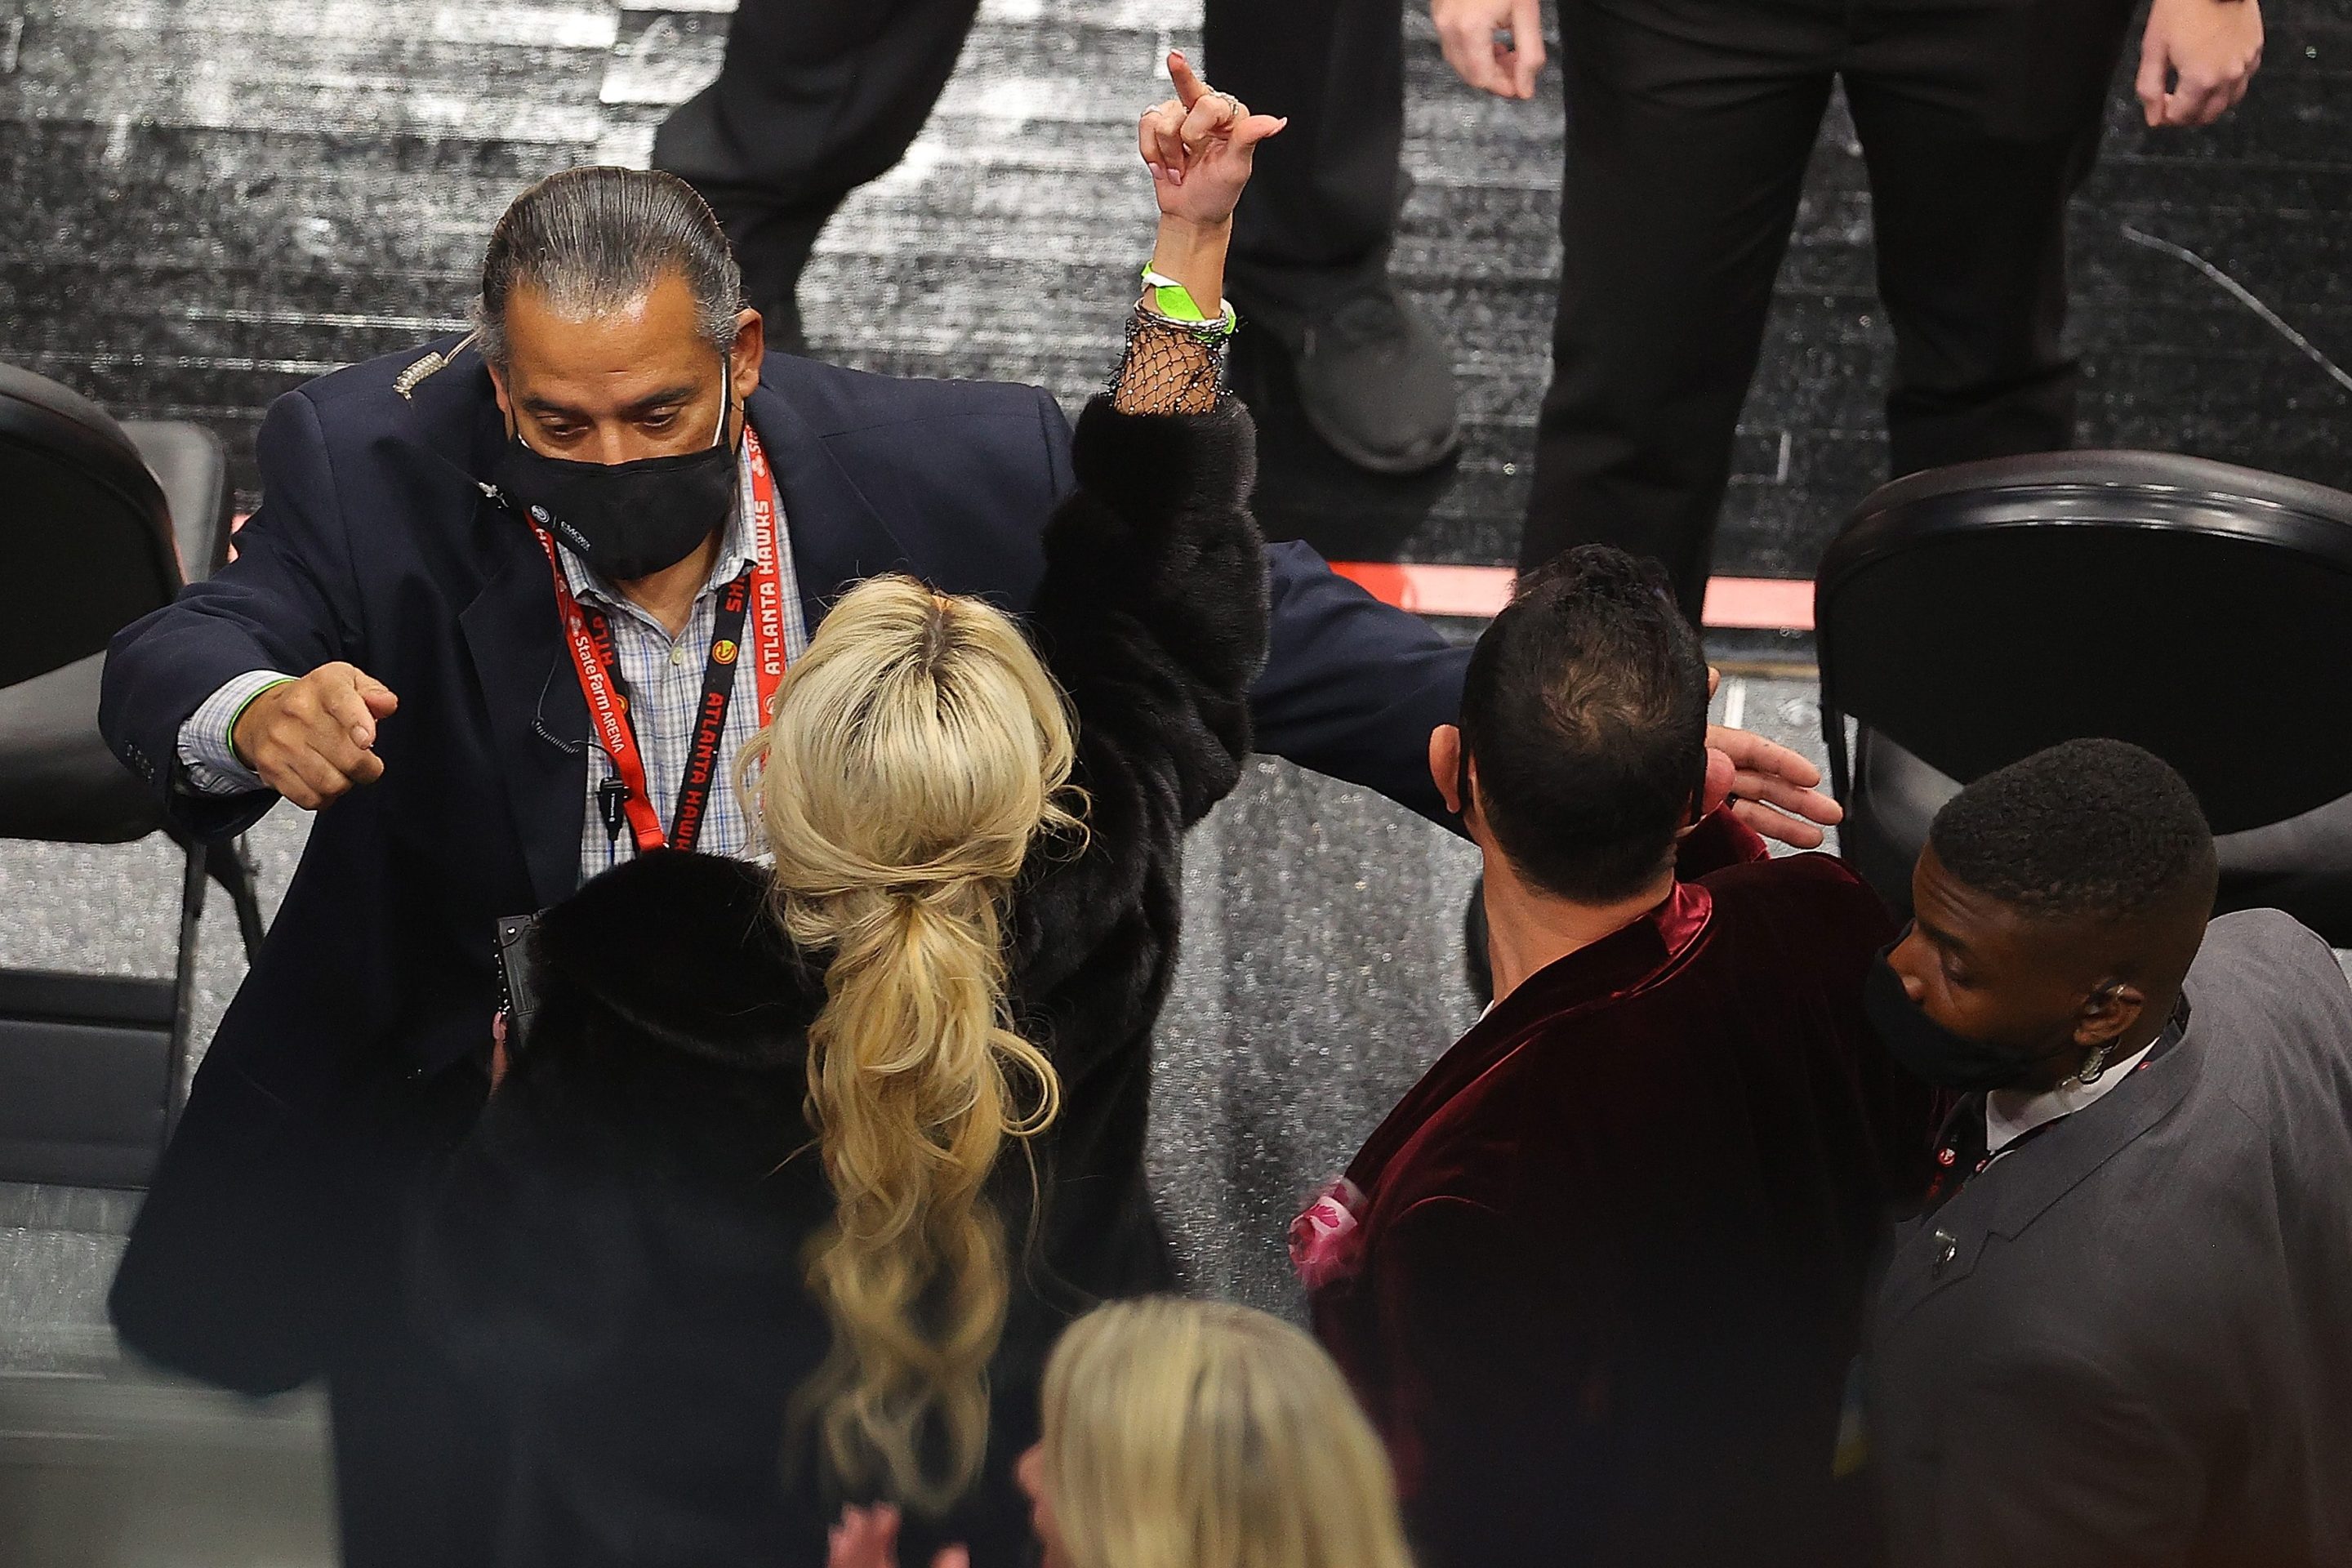 A fan gestures as she and her party are escorted out of the arena during the second half of the game between the Los Angeles Lakers and the Atlanta Hawks at State Farm Arena on February 01, 2021 in Atlanta, Georgia.